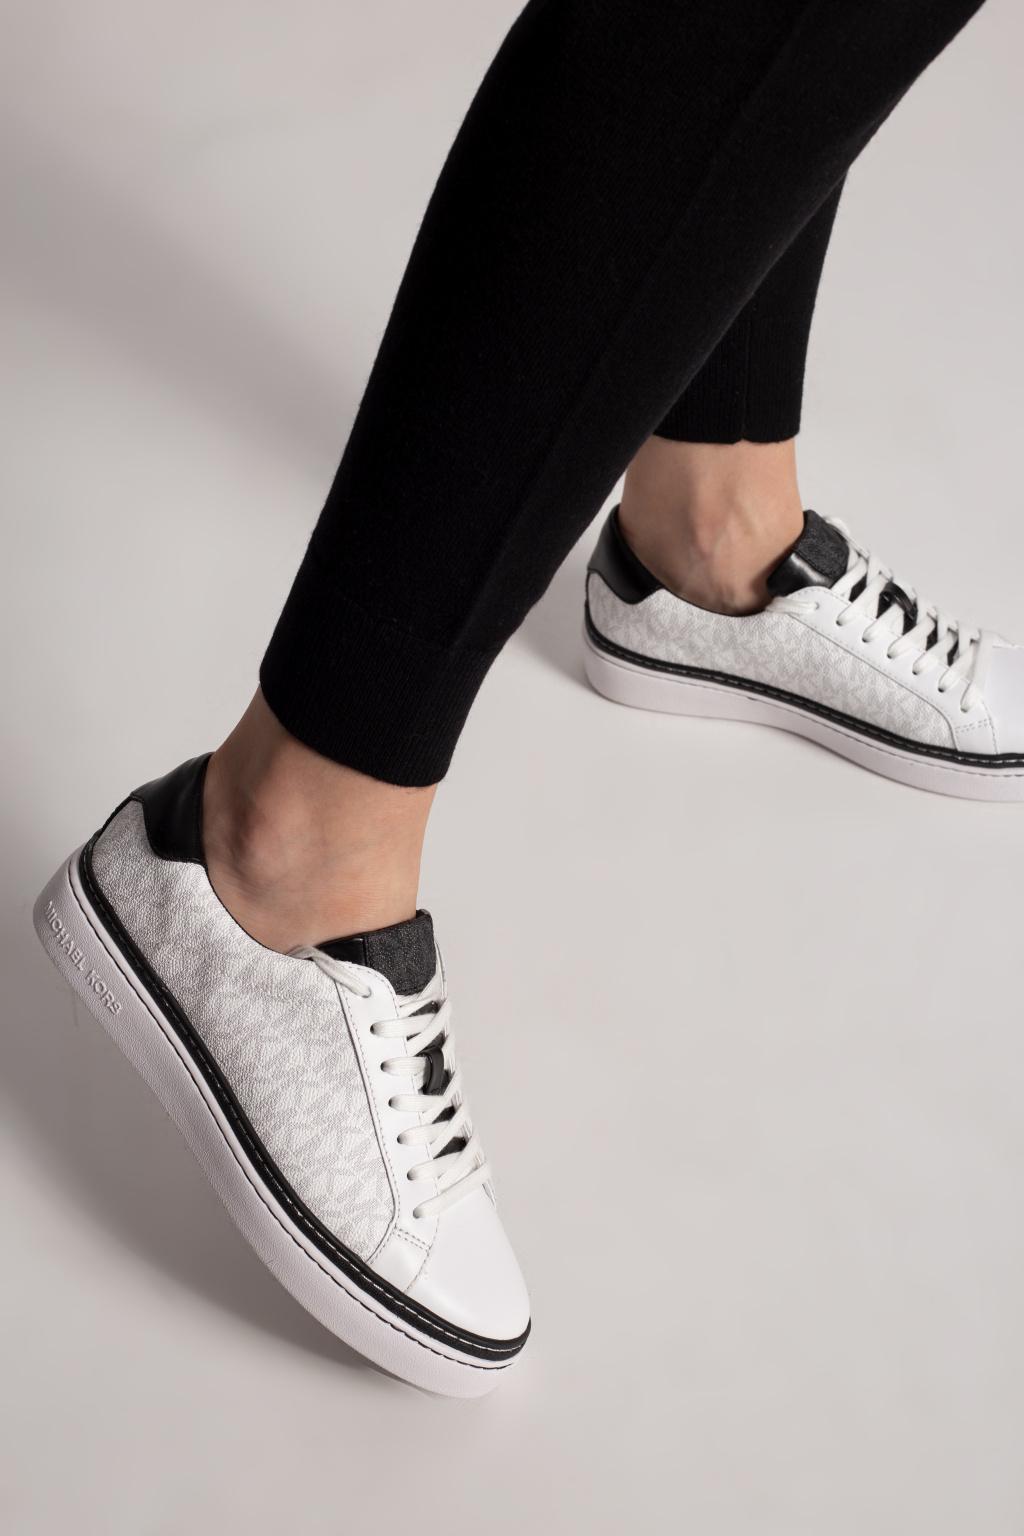 Michael Kors Sneakers In Monogram Canvas And Leather in White | Lyst